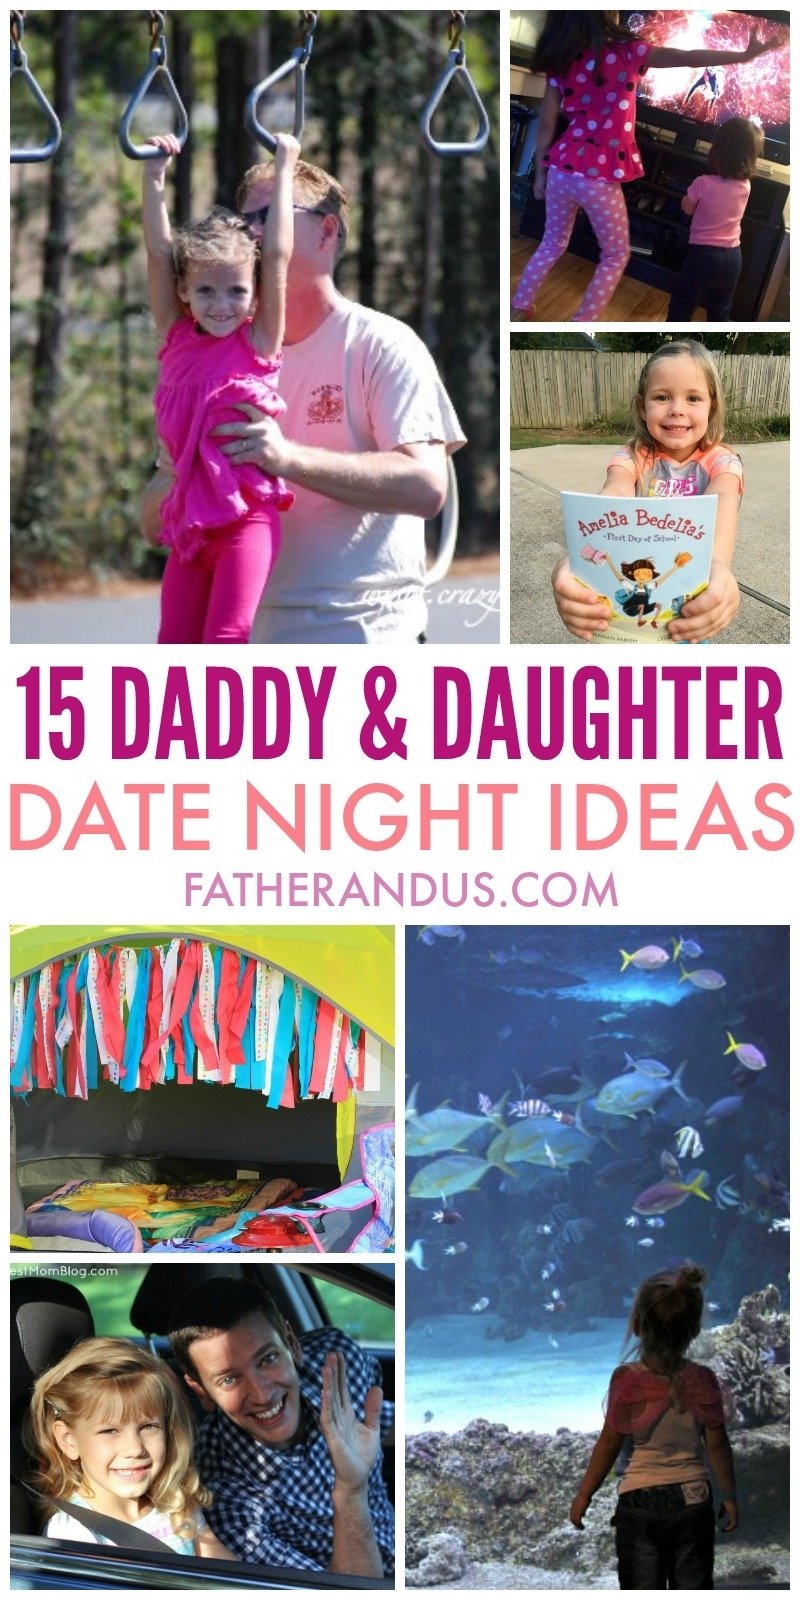 10 Beautiful Daddy Daughter Date Night Ideas daddy daughter date night ideas finding special time with your 1 girl 2022